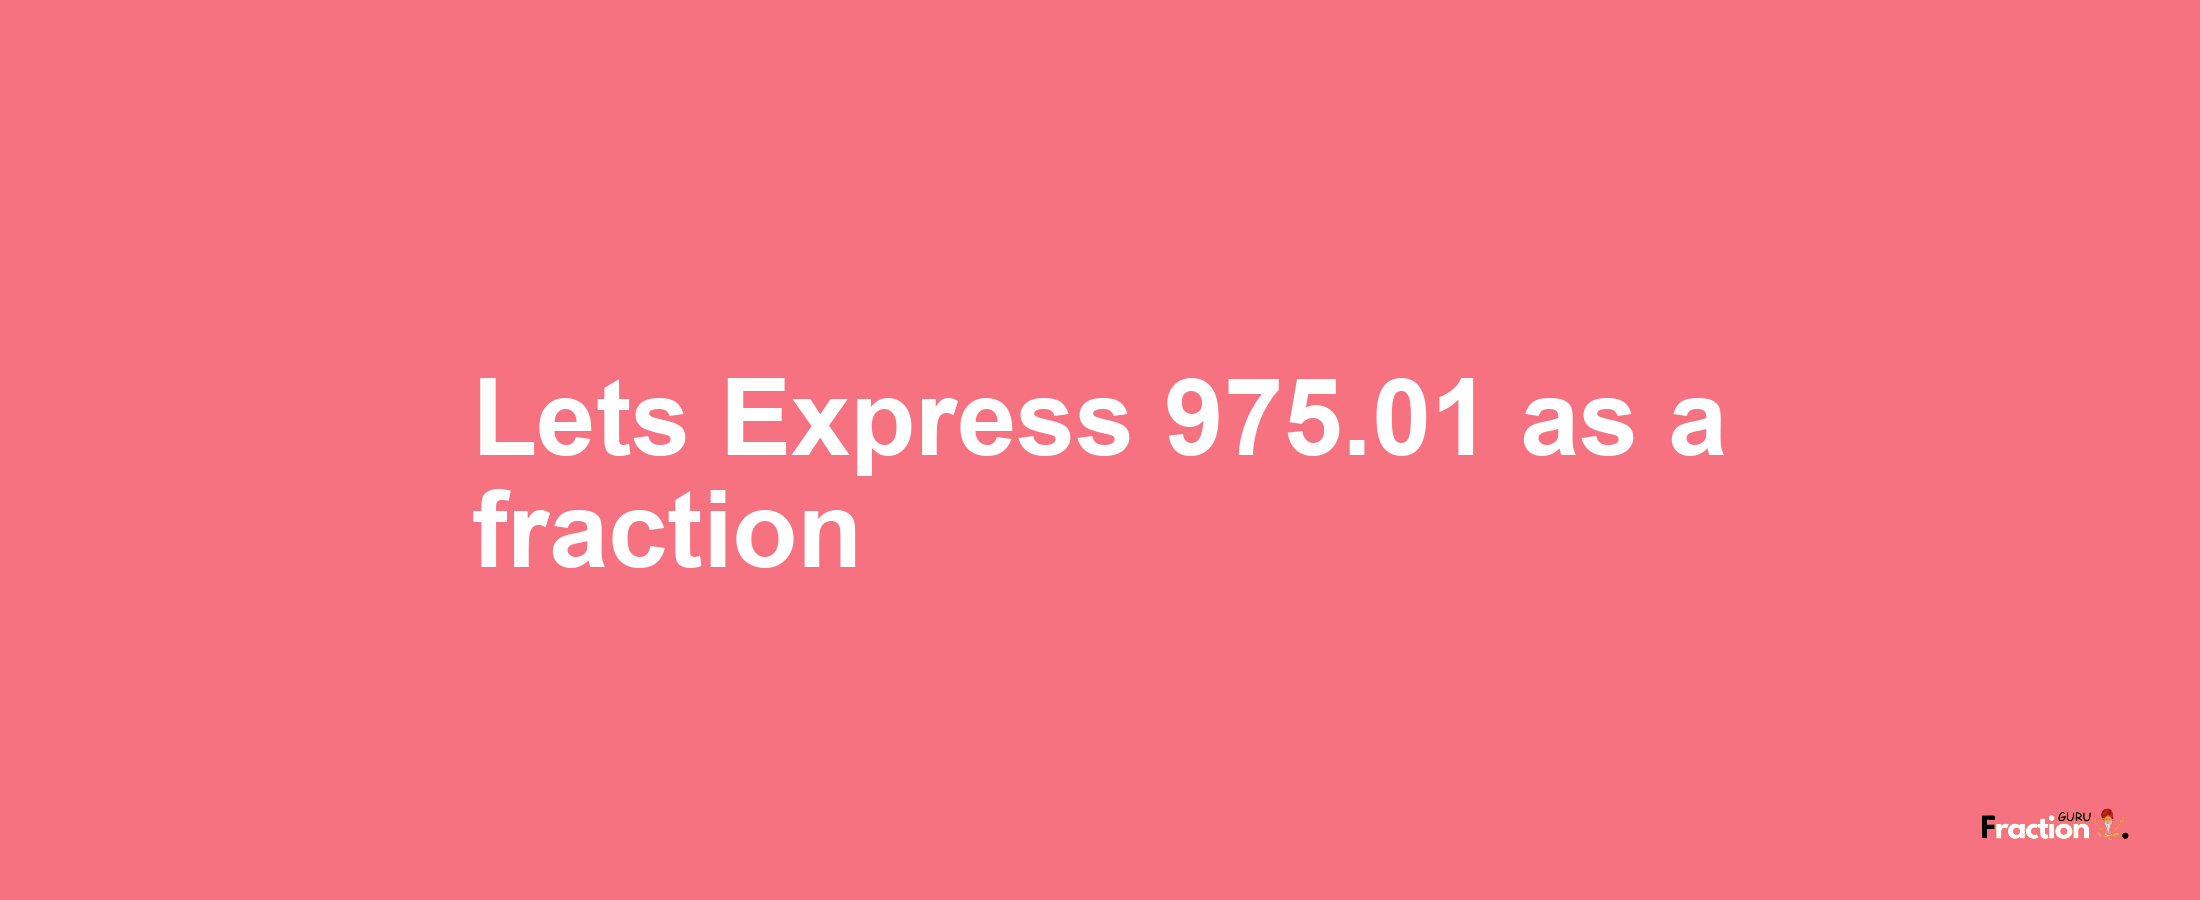 Lets Express 975.01 as afraction